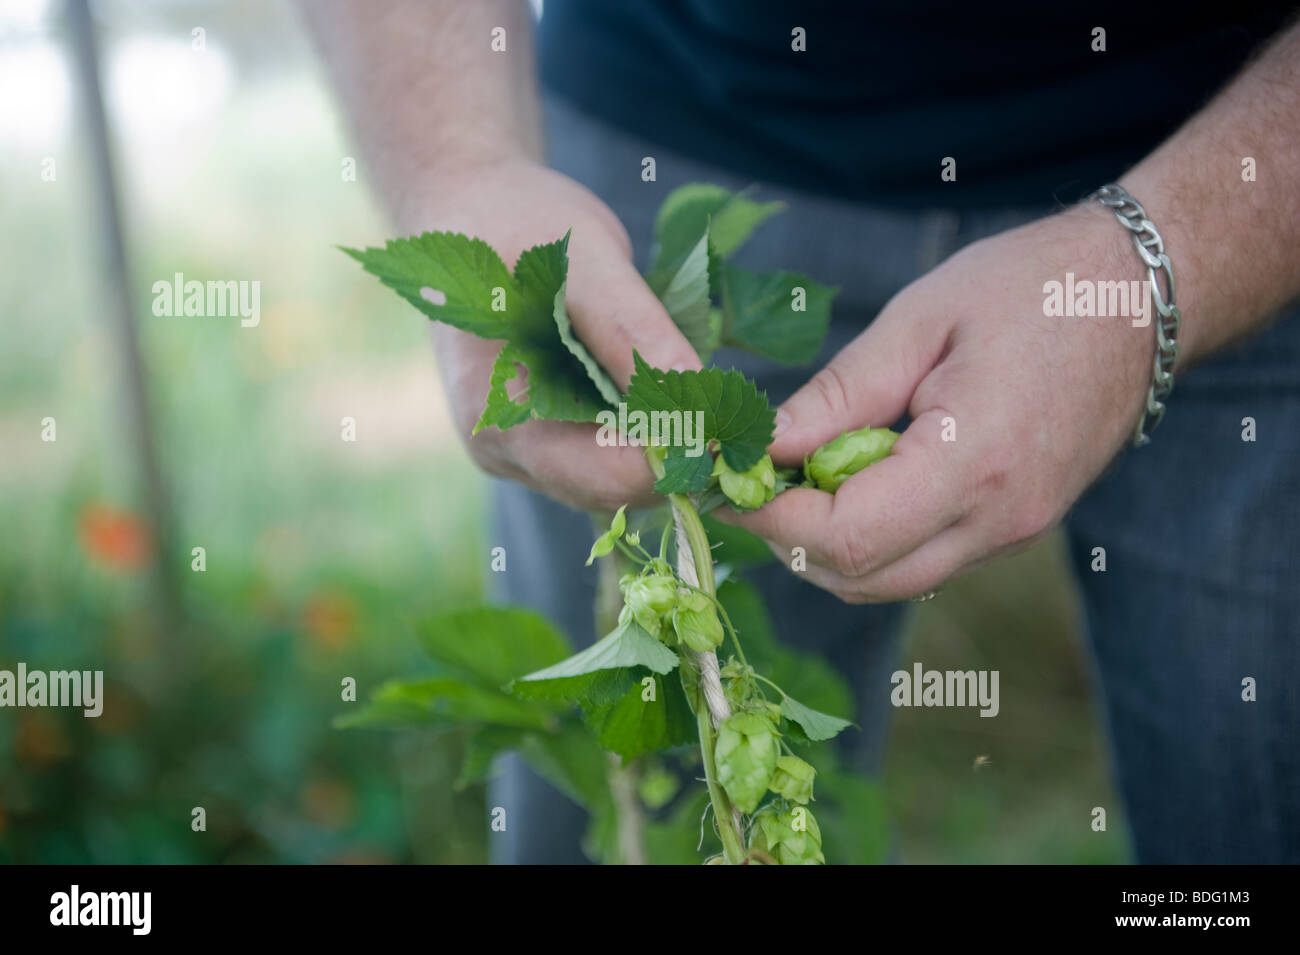 Man's hands and torso as fresh hops are harvested from a hop vine. Stock Photo